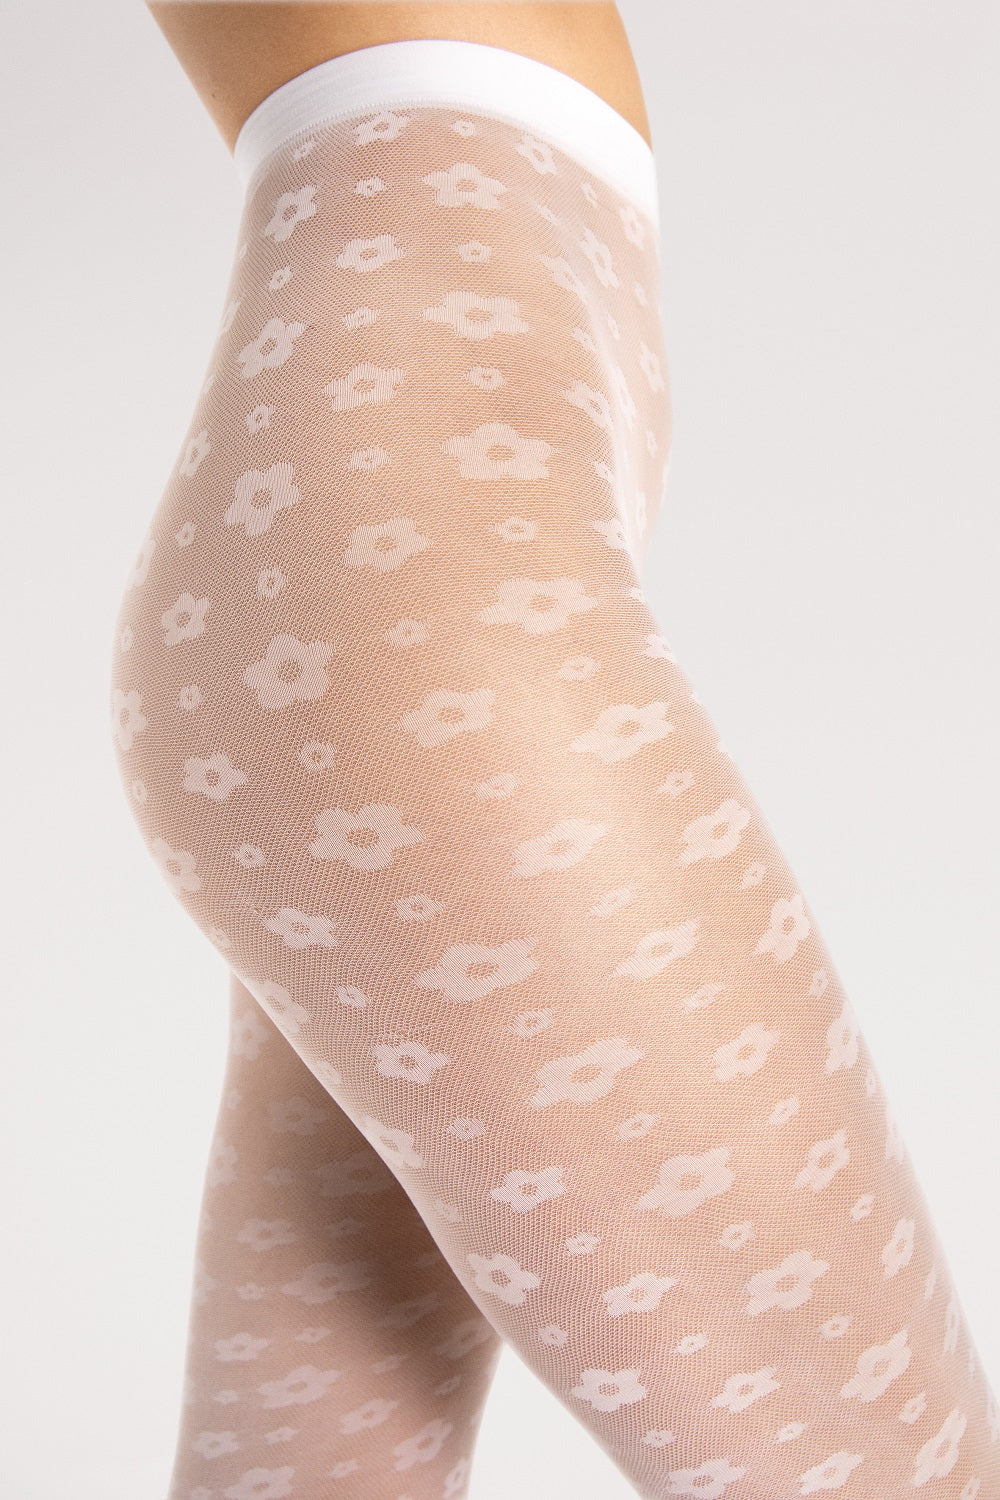 The small, enchanting flowers on the tights